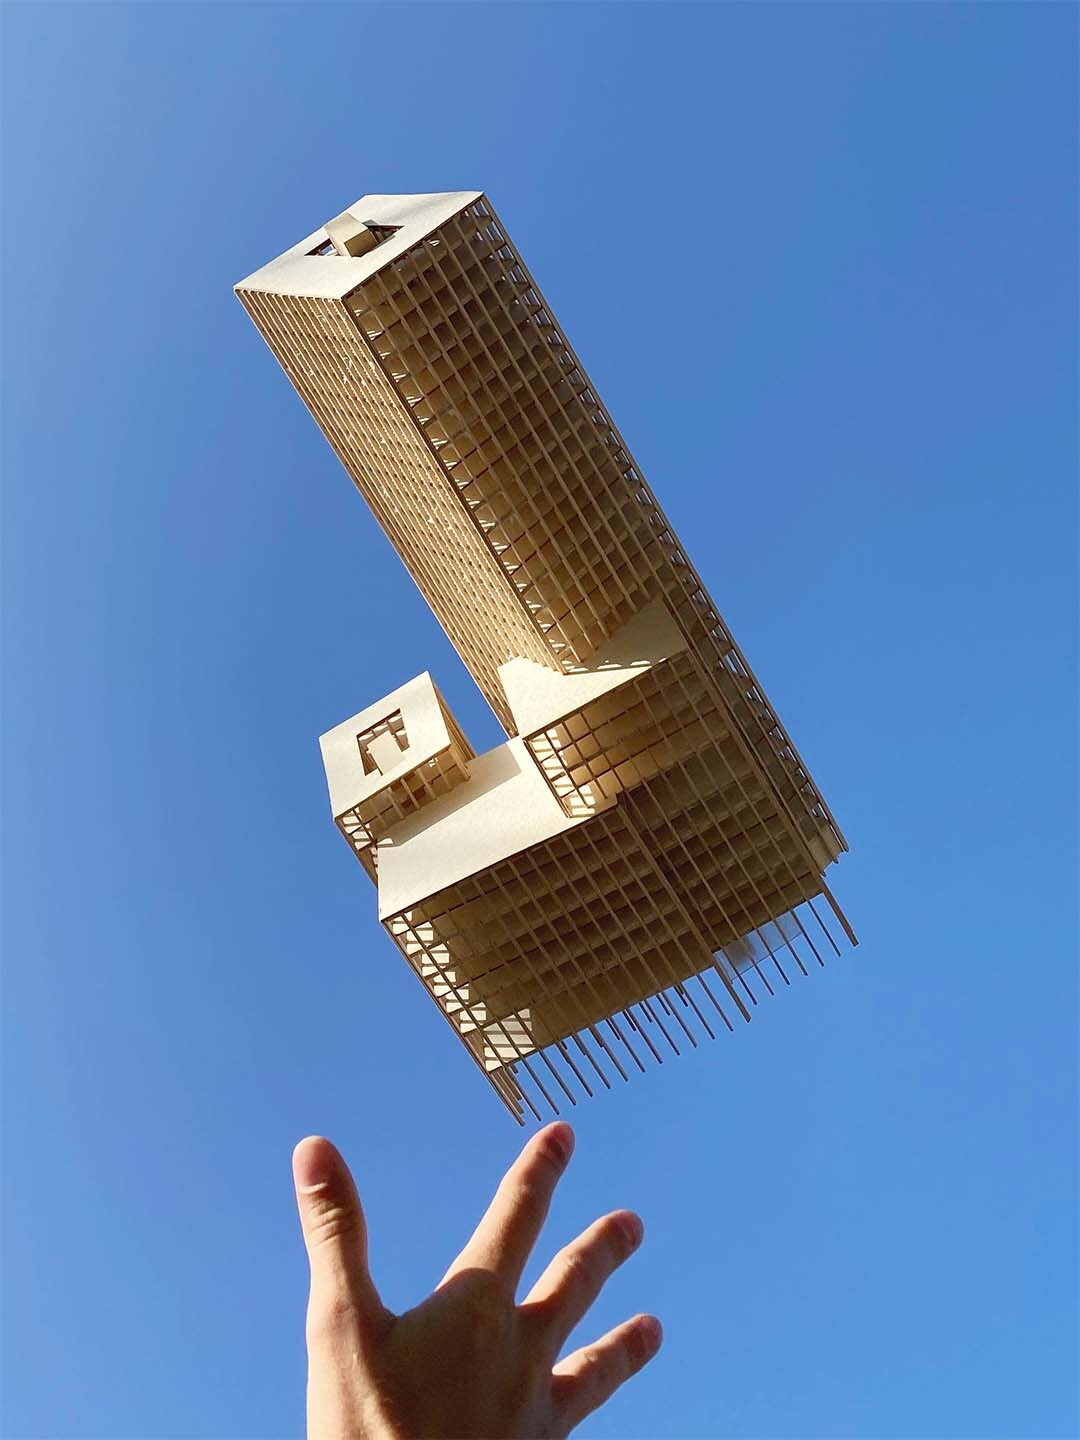 Wooden architectural model being thrown into sky by one hand.